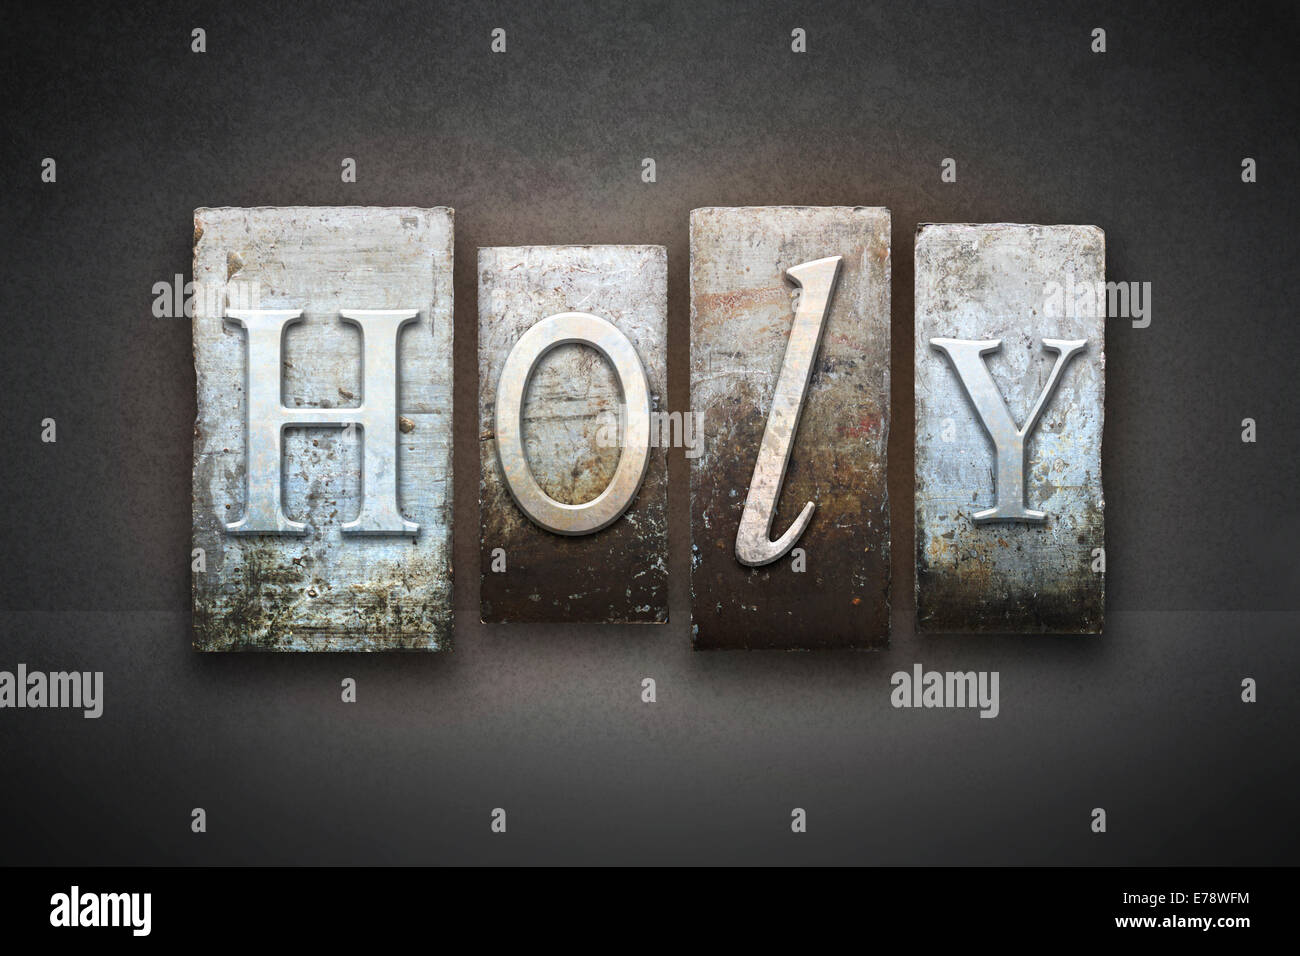 The word HOLY written in vintage letterpress type Stock Photo